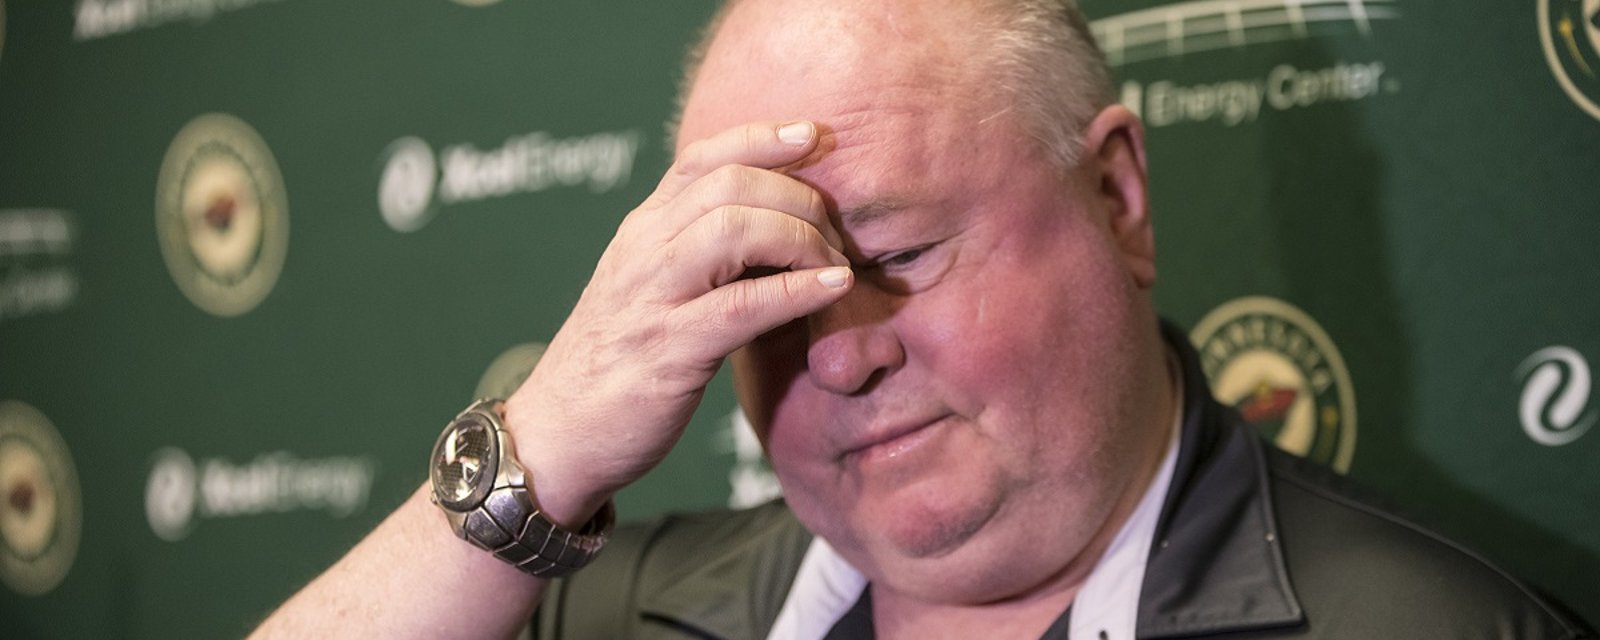 Bruce Boudreau throws his star goaltender under the bus, hints at major change.